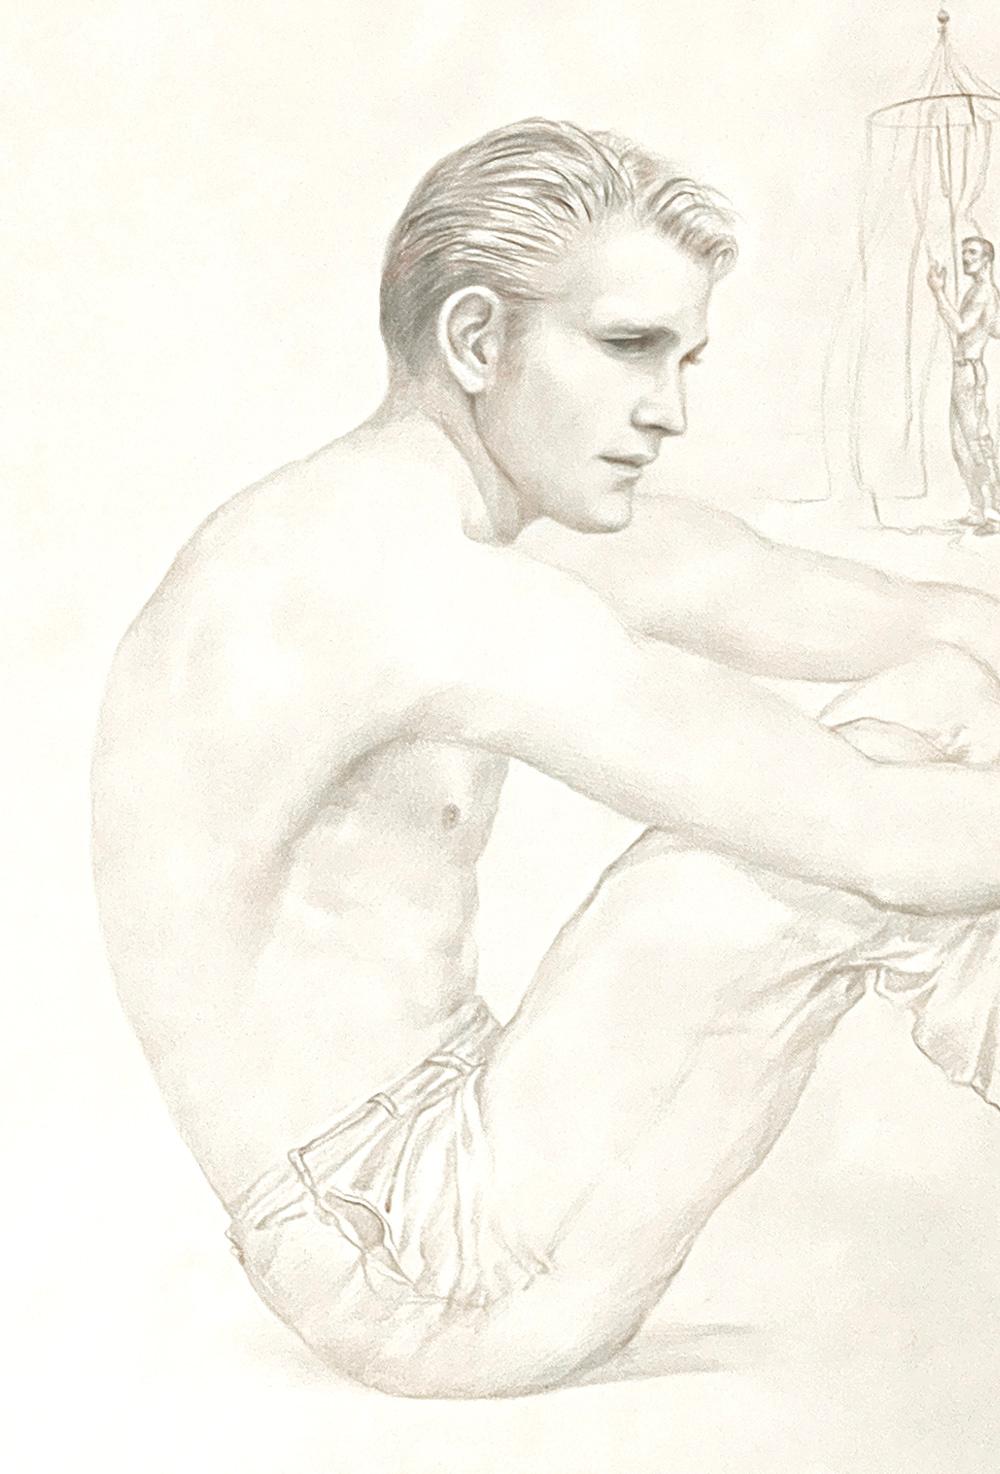 Finely and beautifully captured, this depiction of a shirtless young man, handsome and pensive, sitting on the beach with his legs grasped in his arms, is a rare, early drawing by John B. Lear. Over his long career, Lear liked to depict nude or